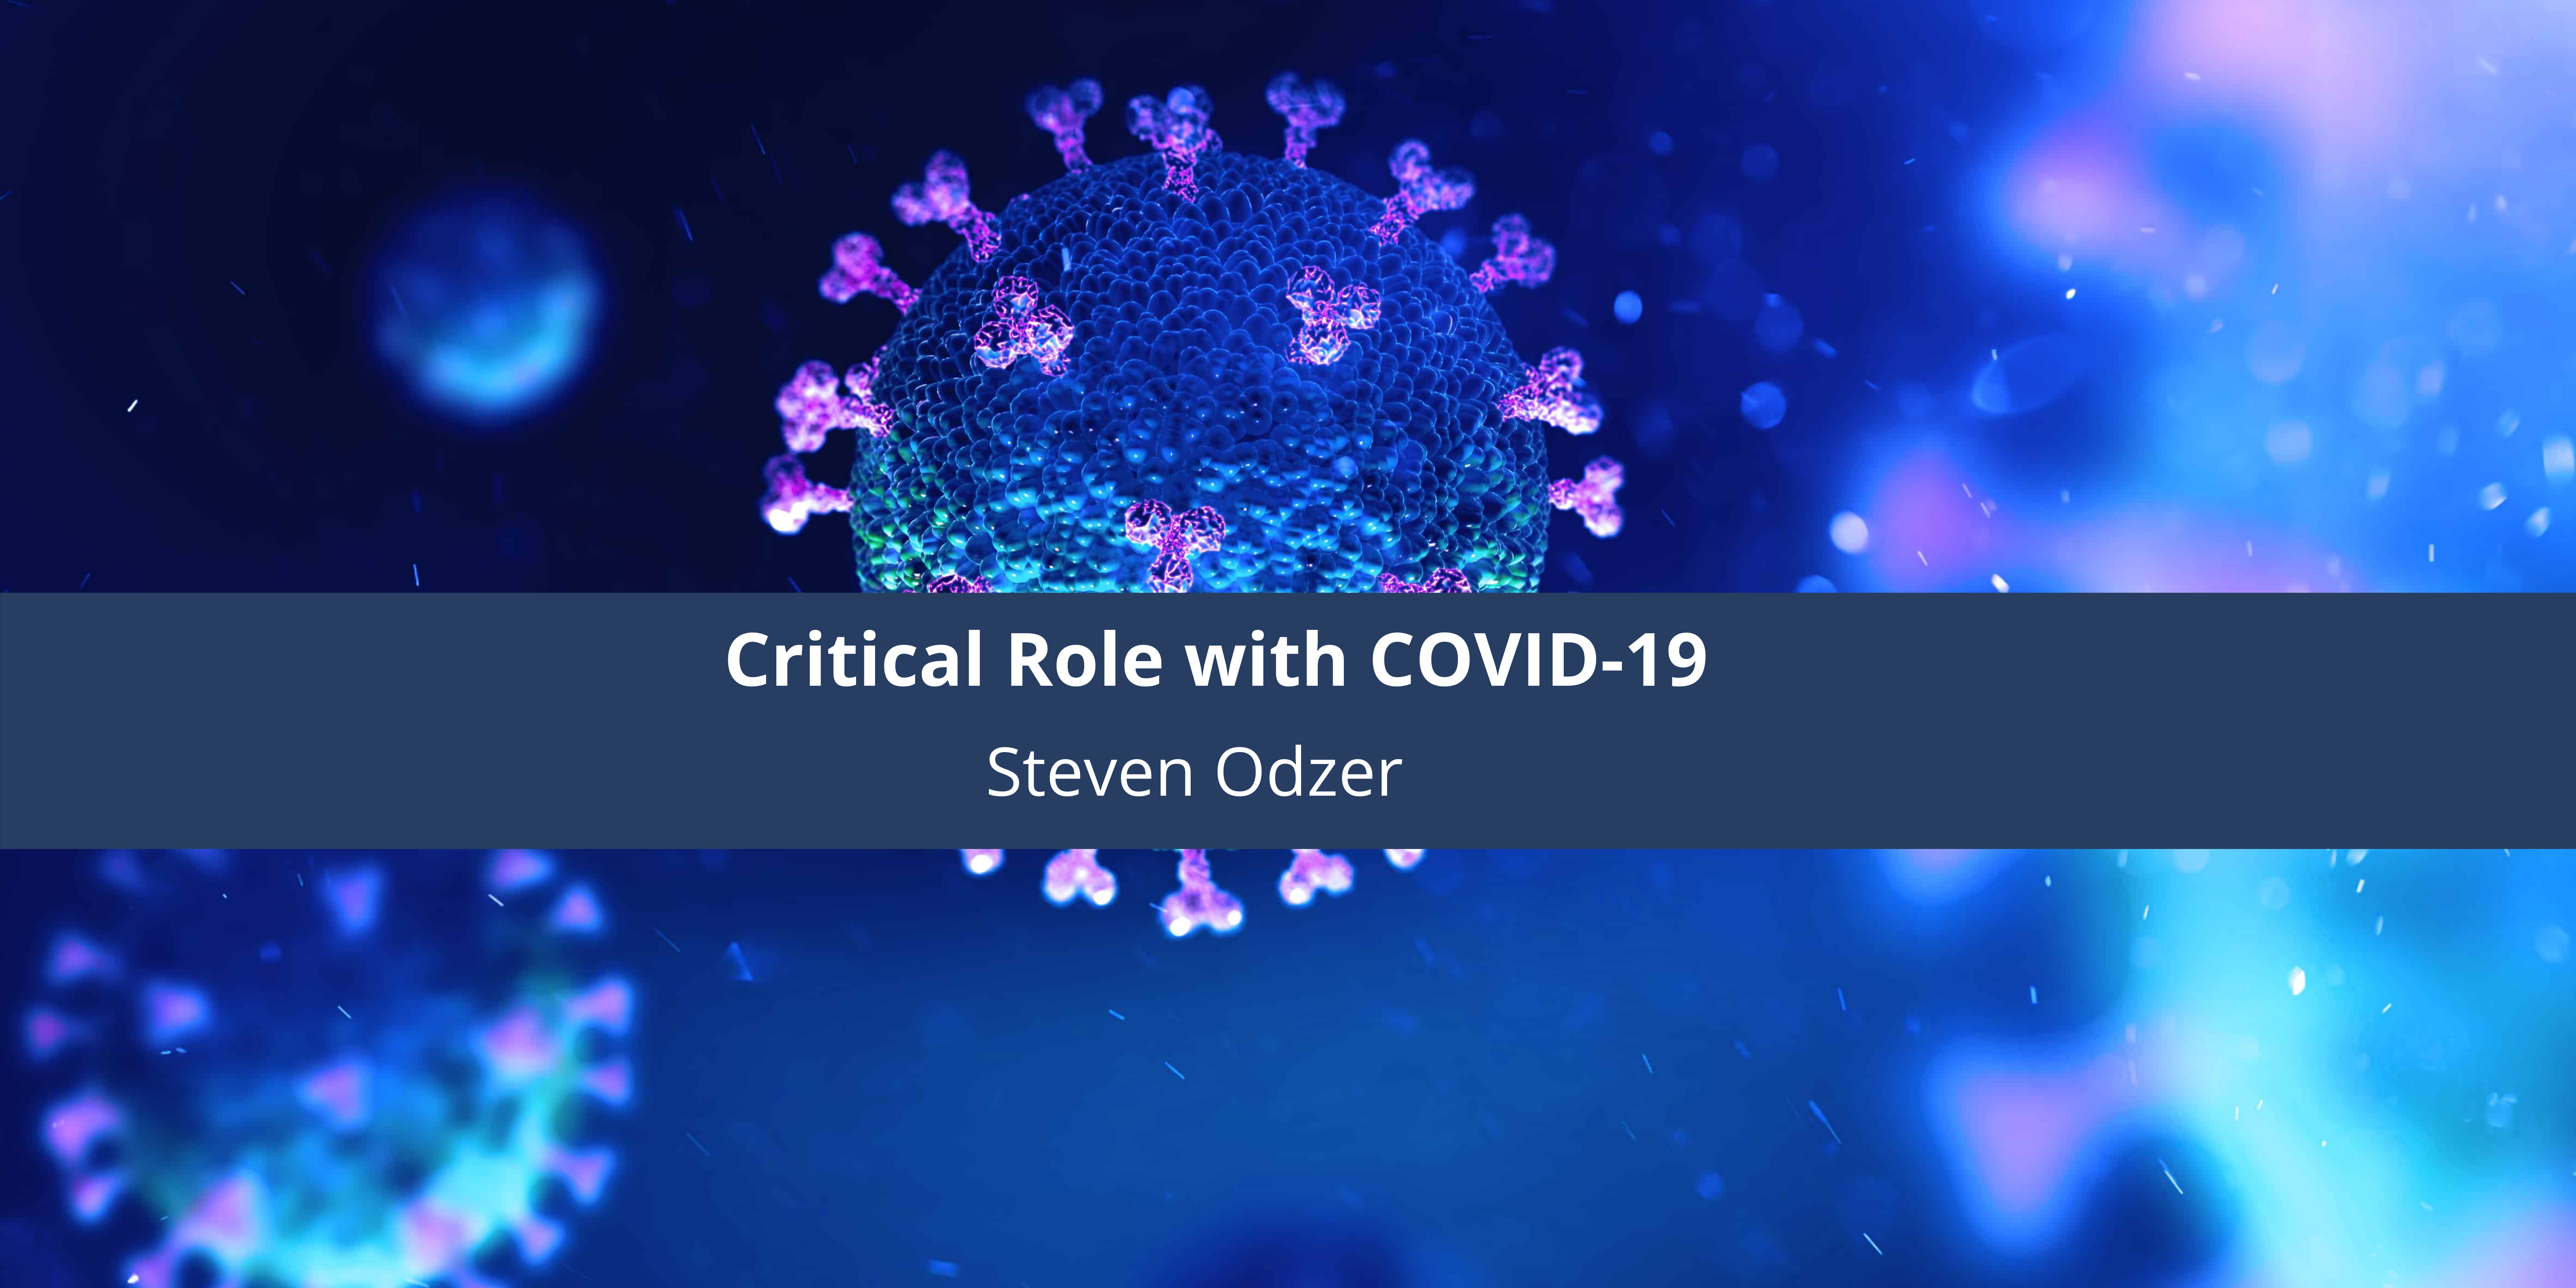 Lifeguard Under Steven Odzer Proves a Critical Role with COVID-19